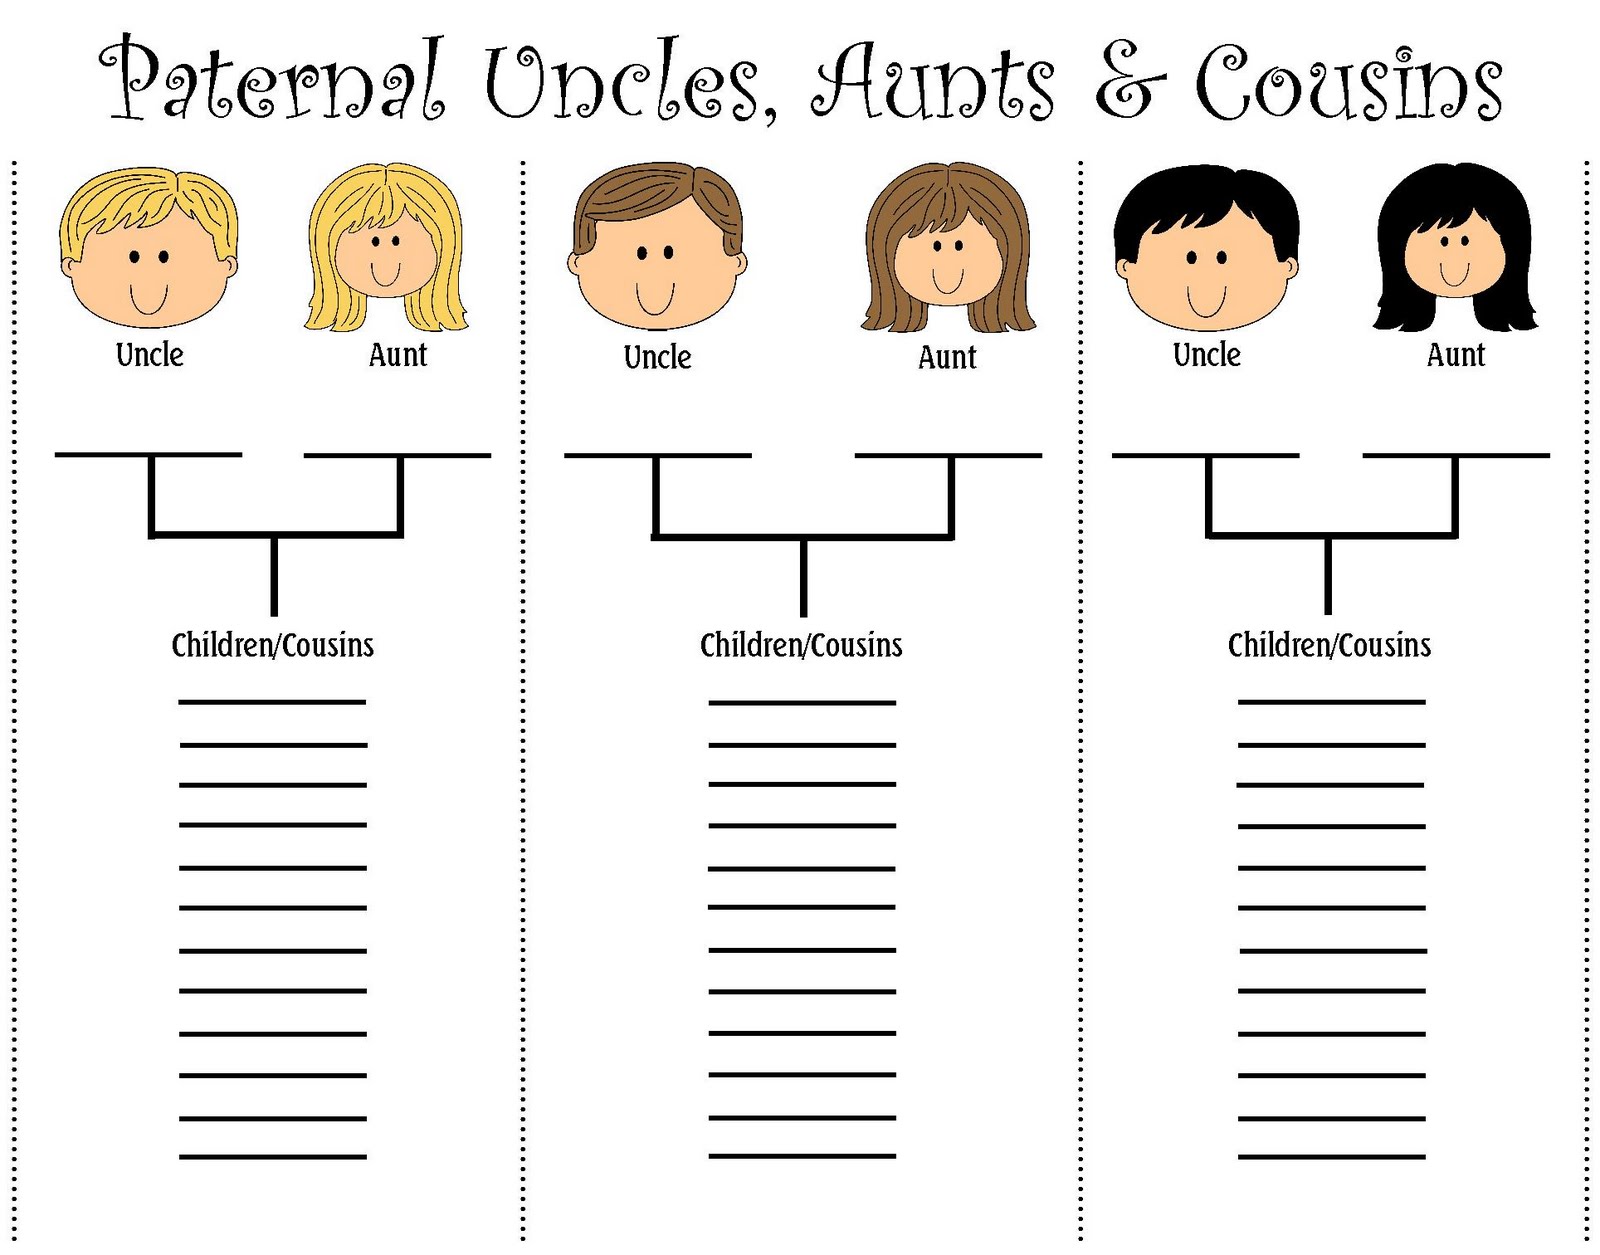 extended-family-family-tree-template-with-siblings-aunts-uncles-cousins